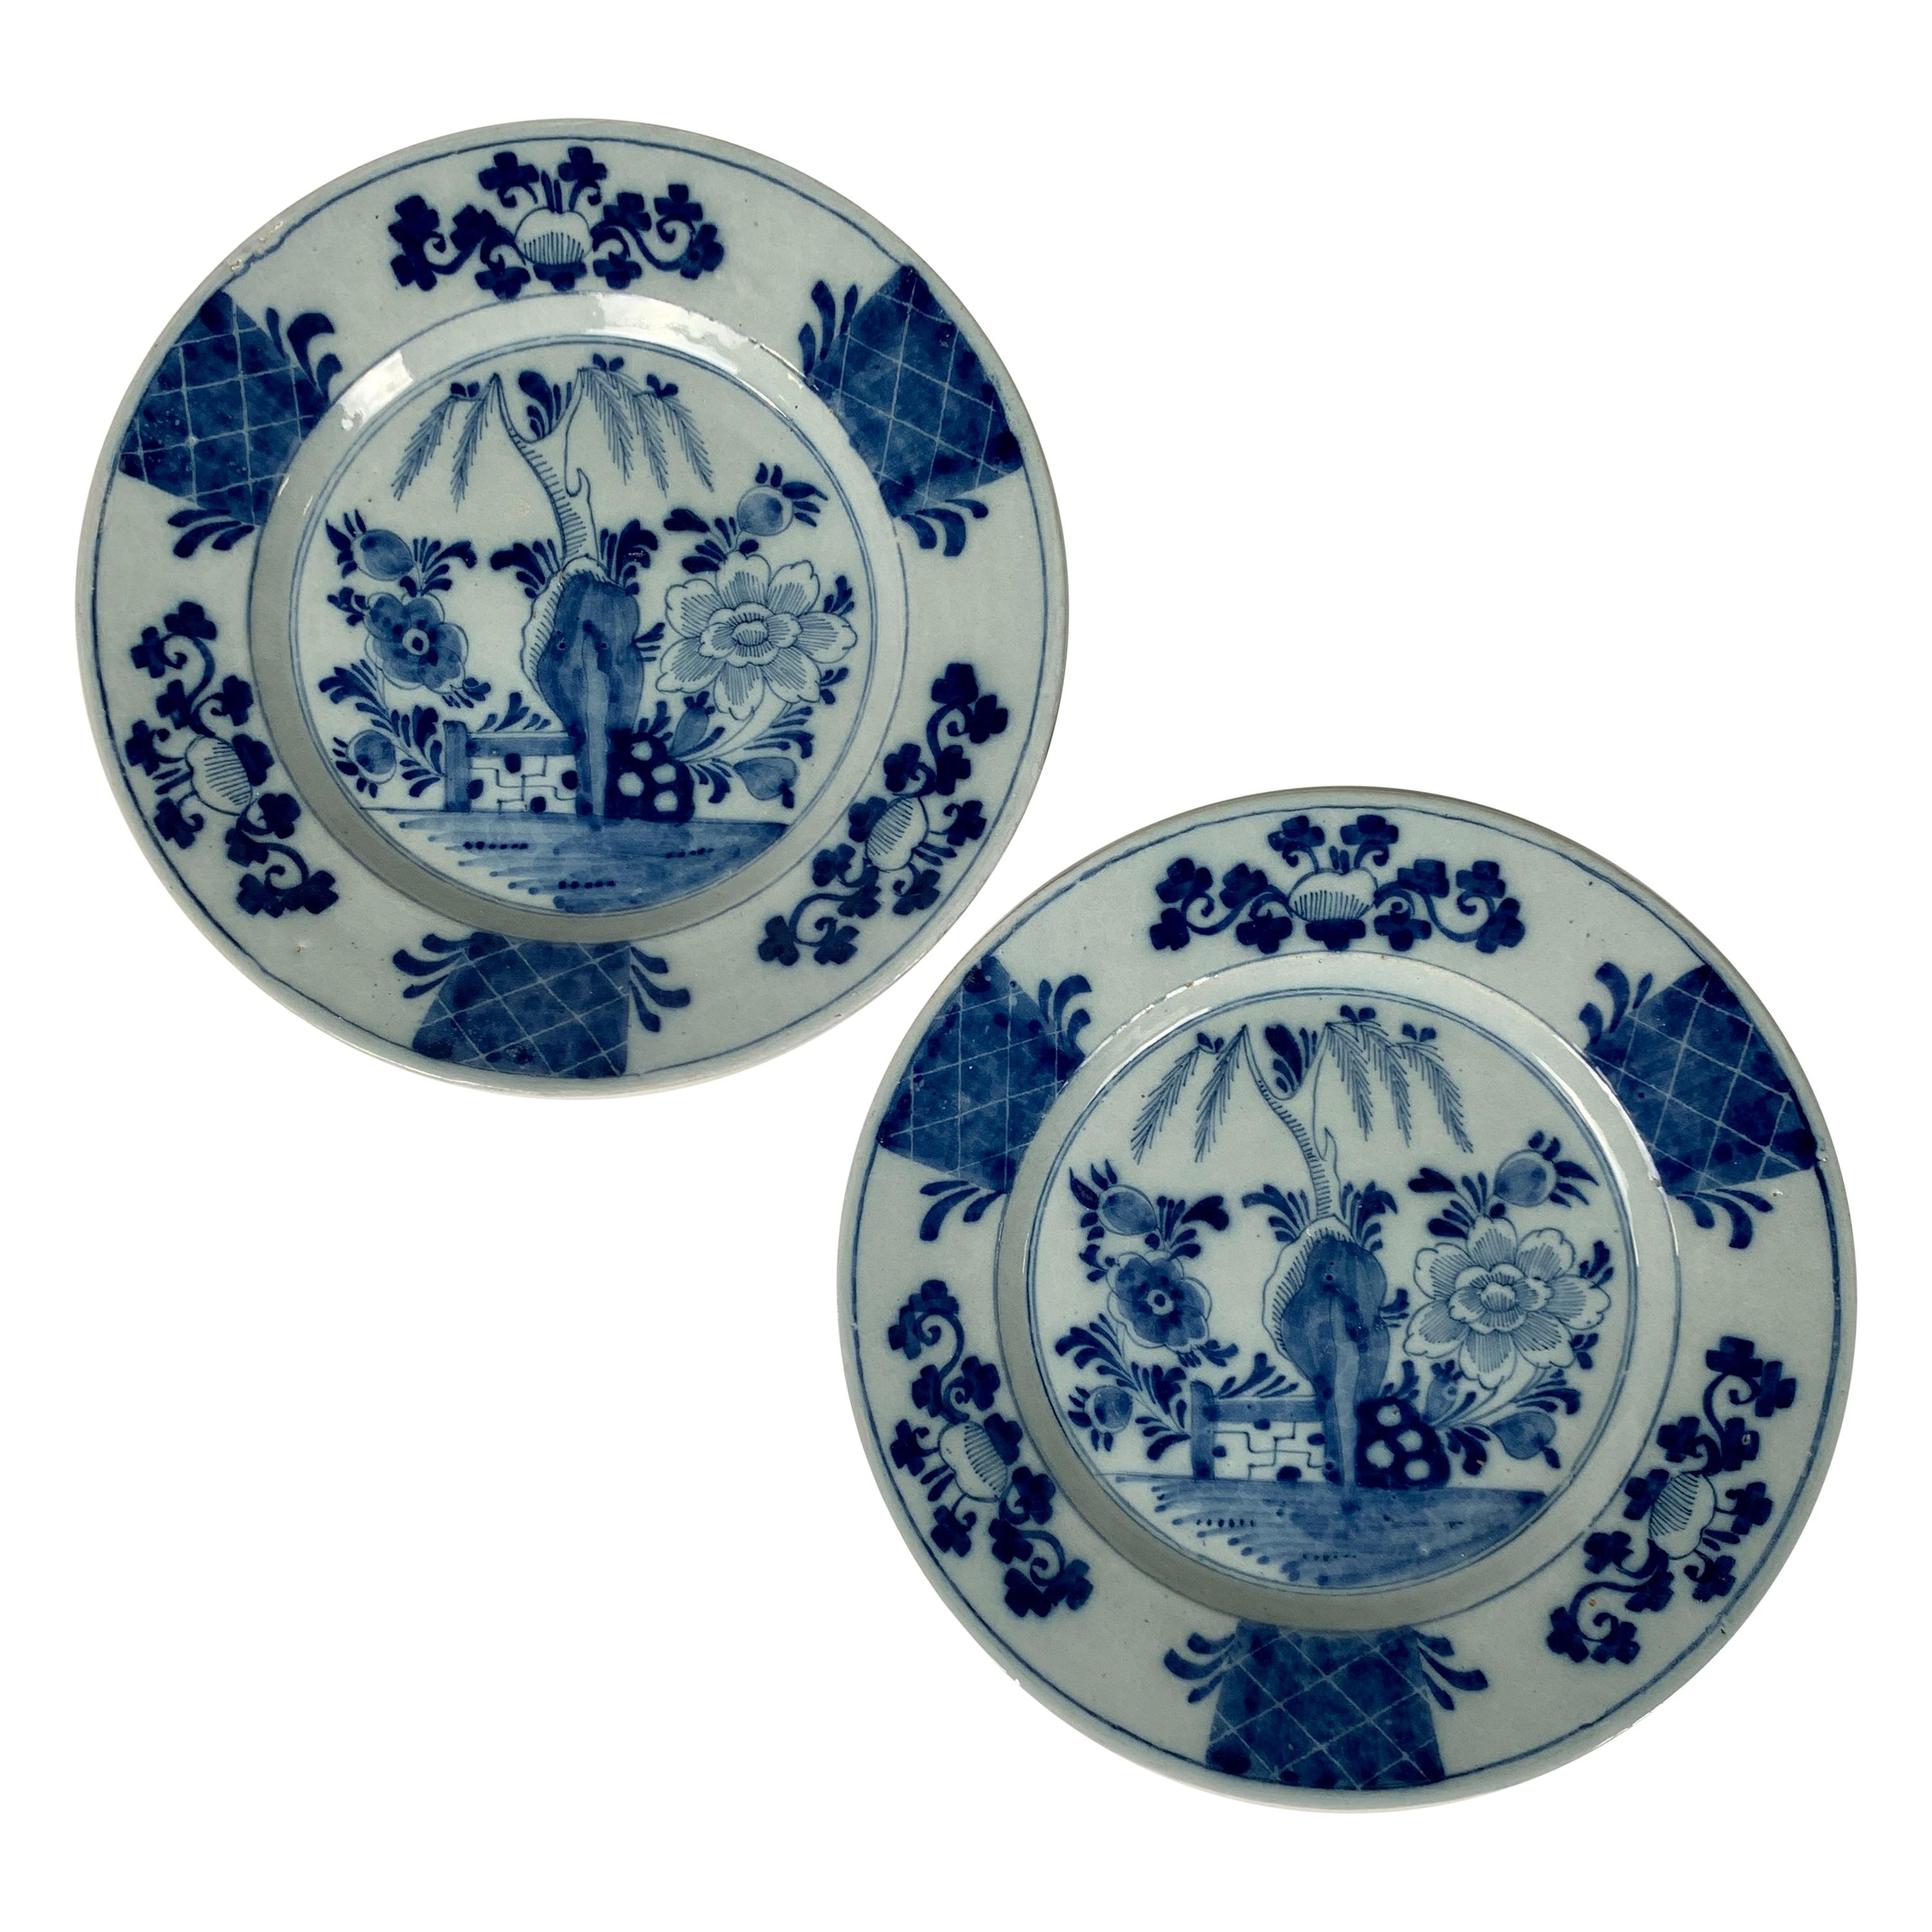 Pair of Antique Blue and White Dutch Delft Dishes Hand-Painted, Circa 1770